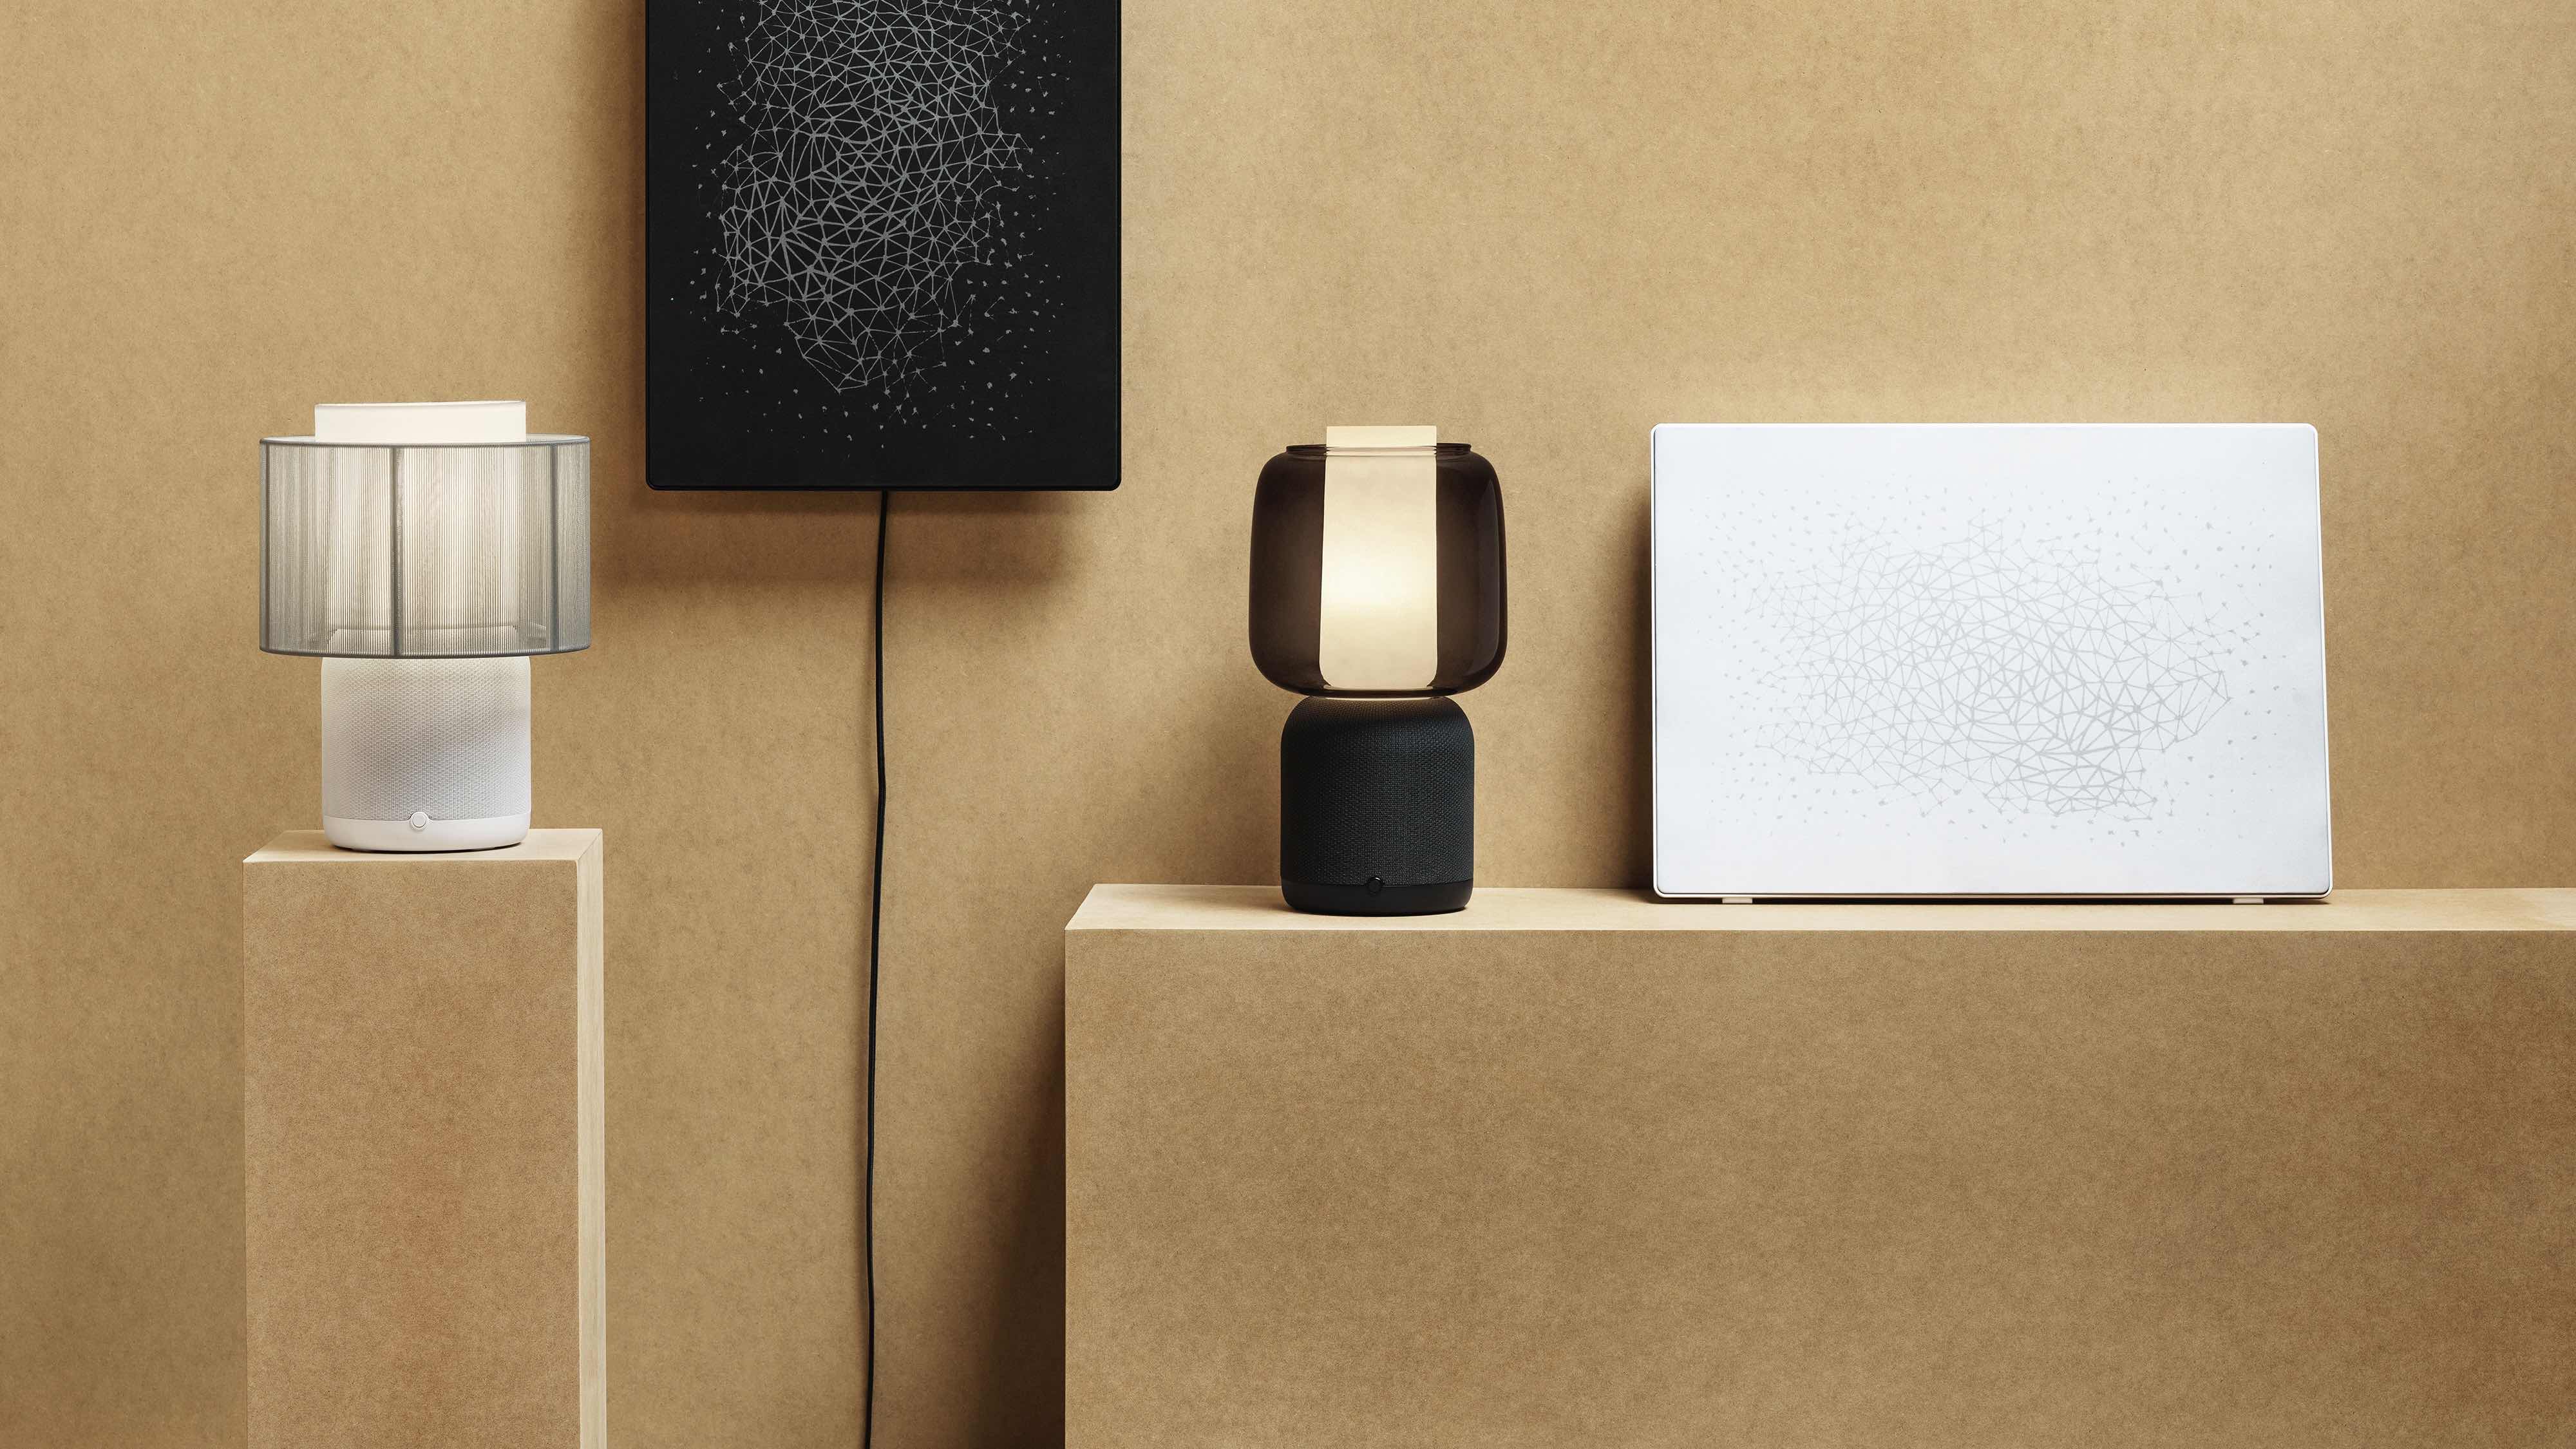 Ikea and Sonos launch AirPlay 2 Symfonisk smart speaker/lamp with mix match design 9to5Mac